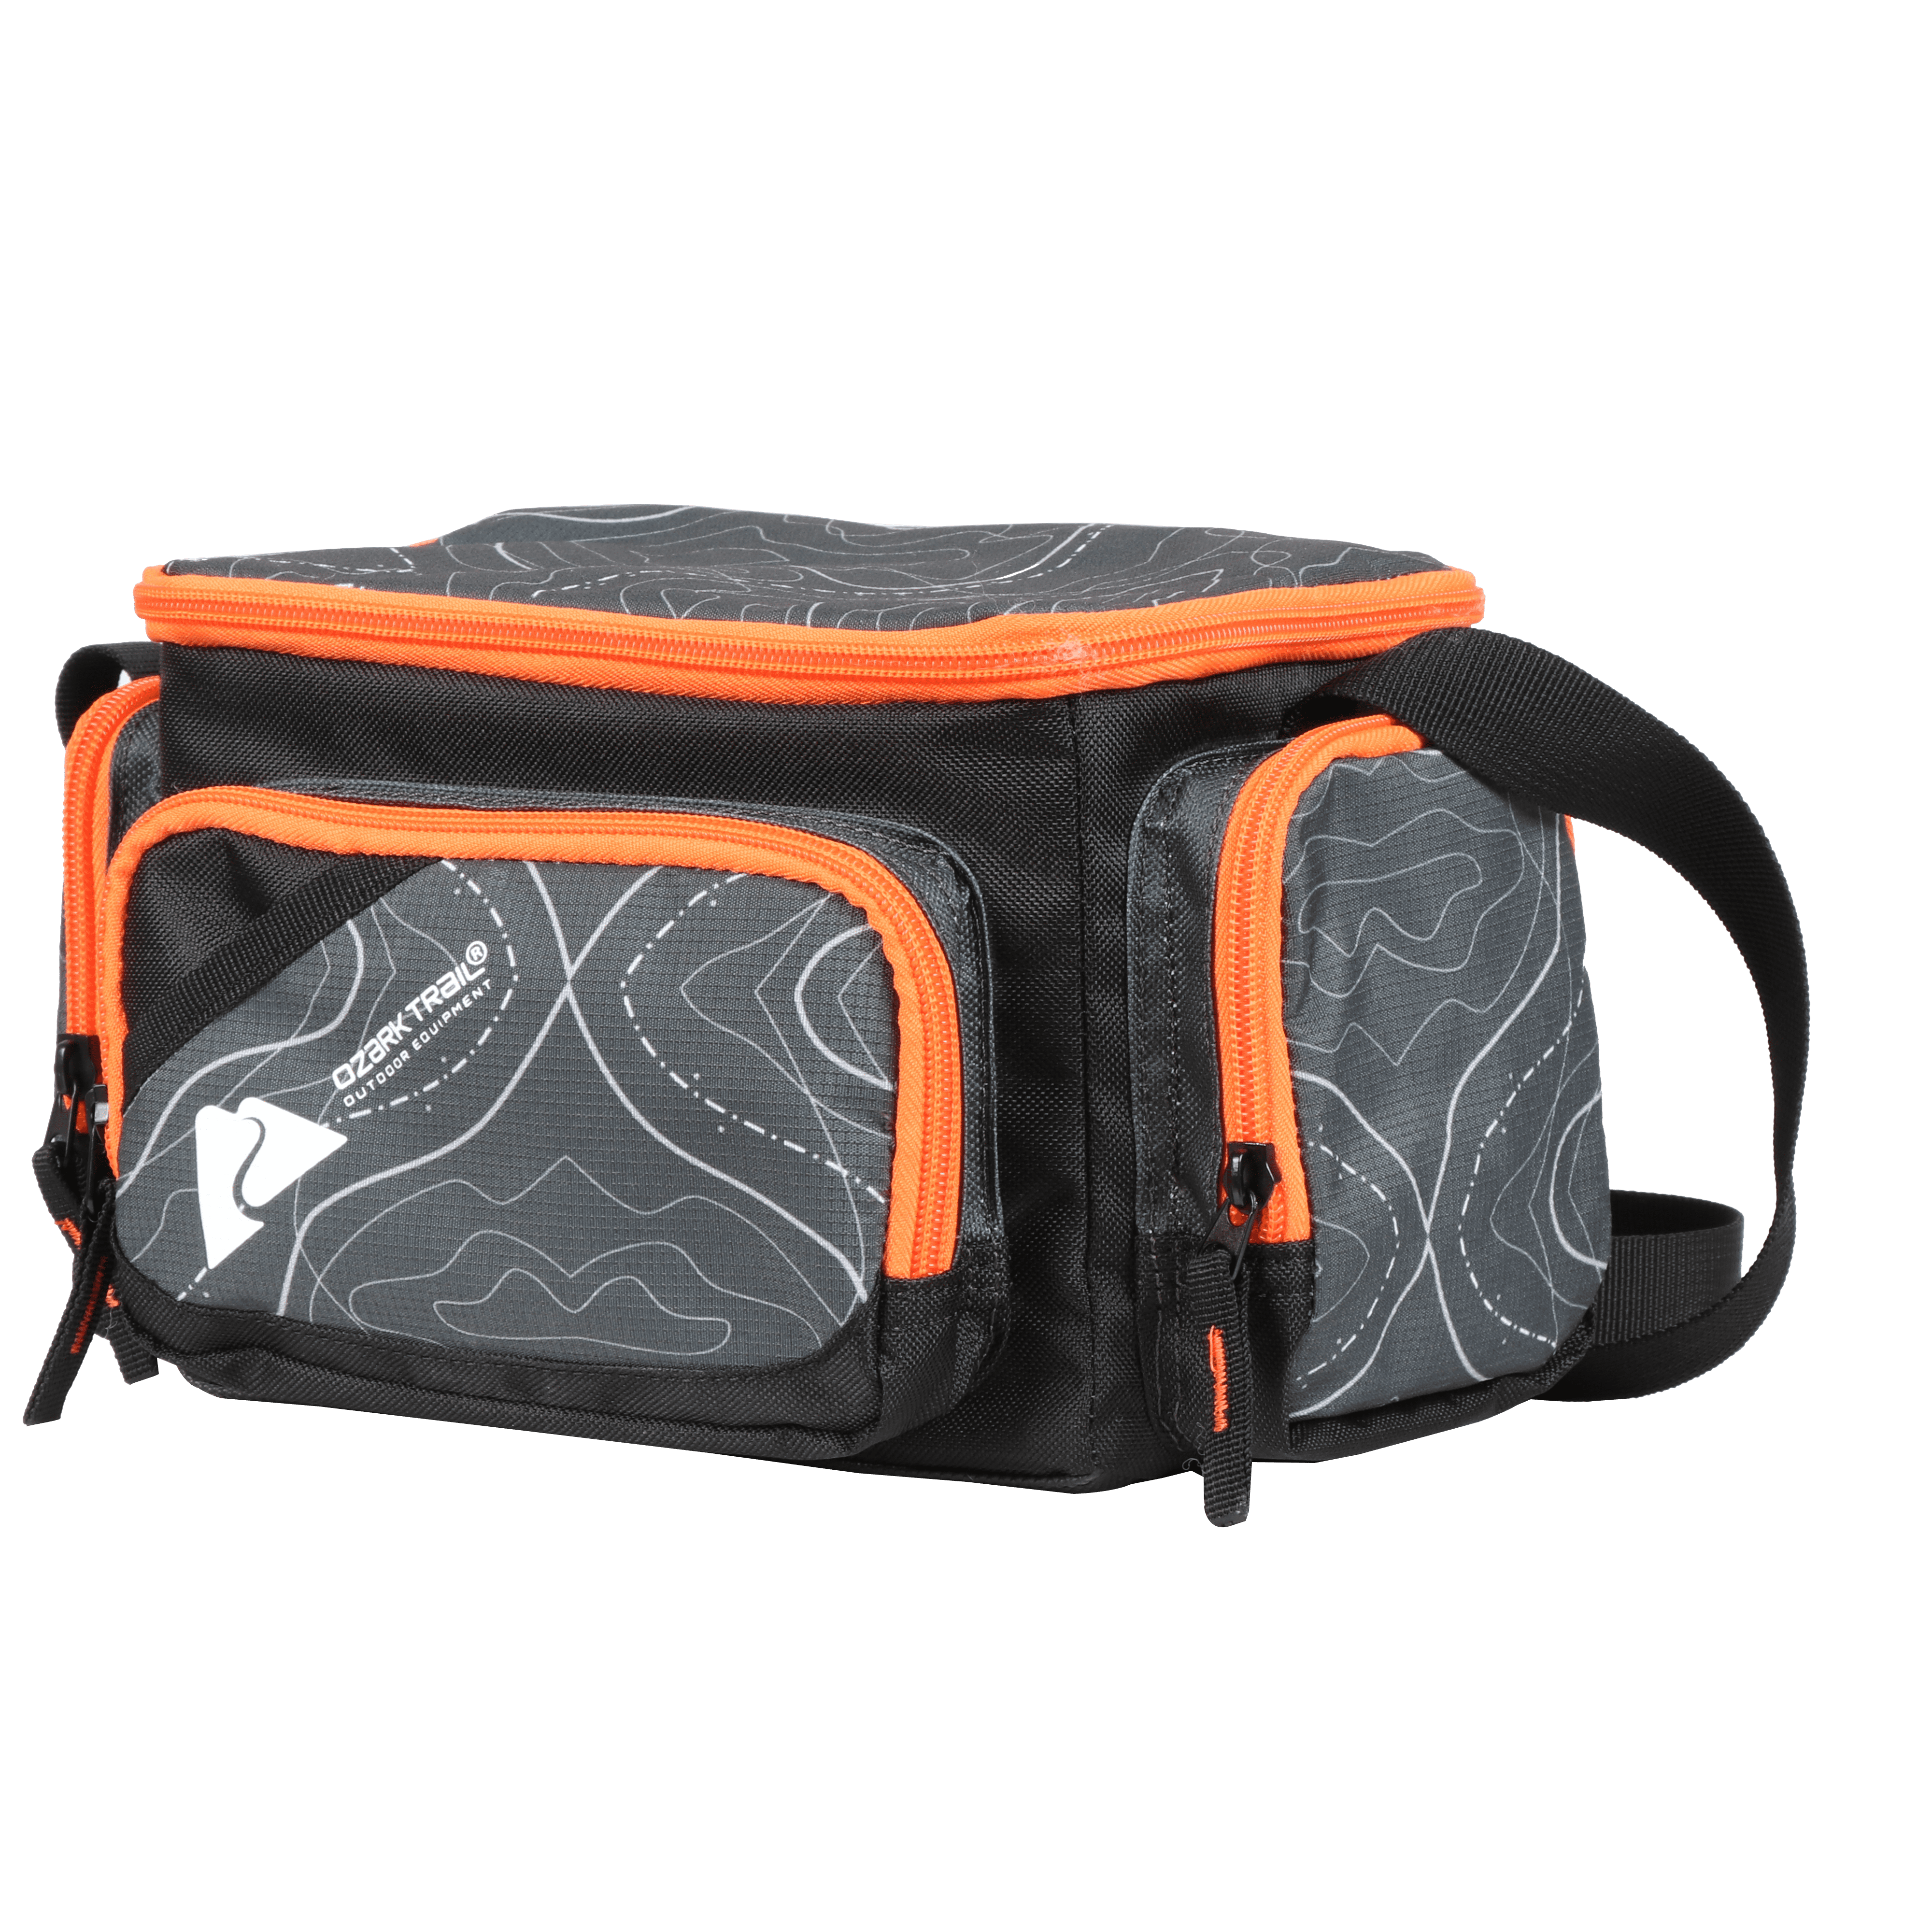 carpenter On the verge Condense Ozark Trail Soft-sided 350 Fishing Tackle Bag with 3 Tackle Boxes, Black -  Walmart.com